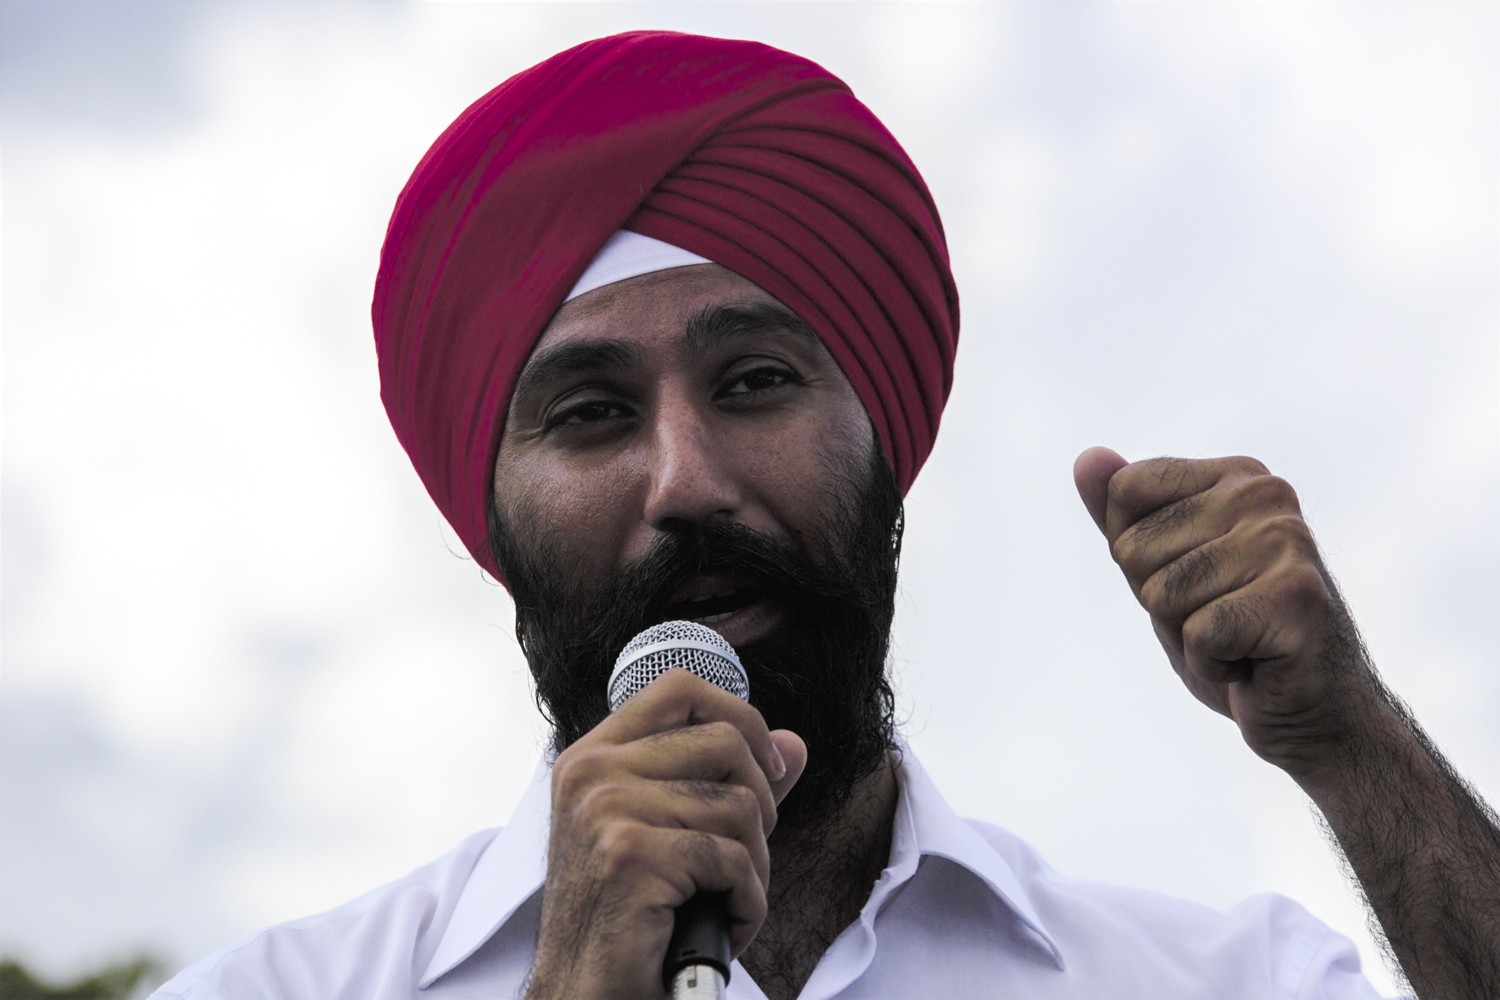 Raj Grewal given confidential details by mayor’s aide on Brampton land deal that cost city $1M extra; investigation sent to RCMP